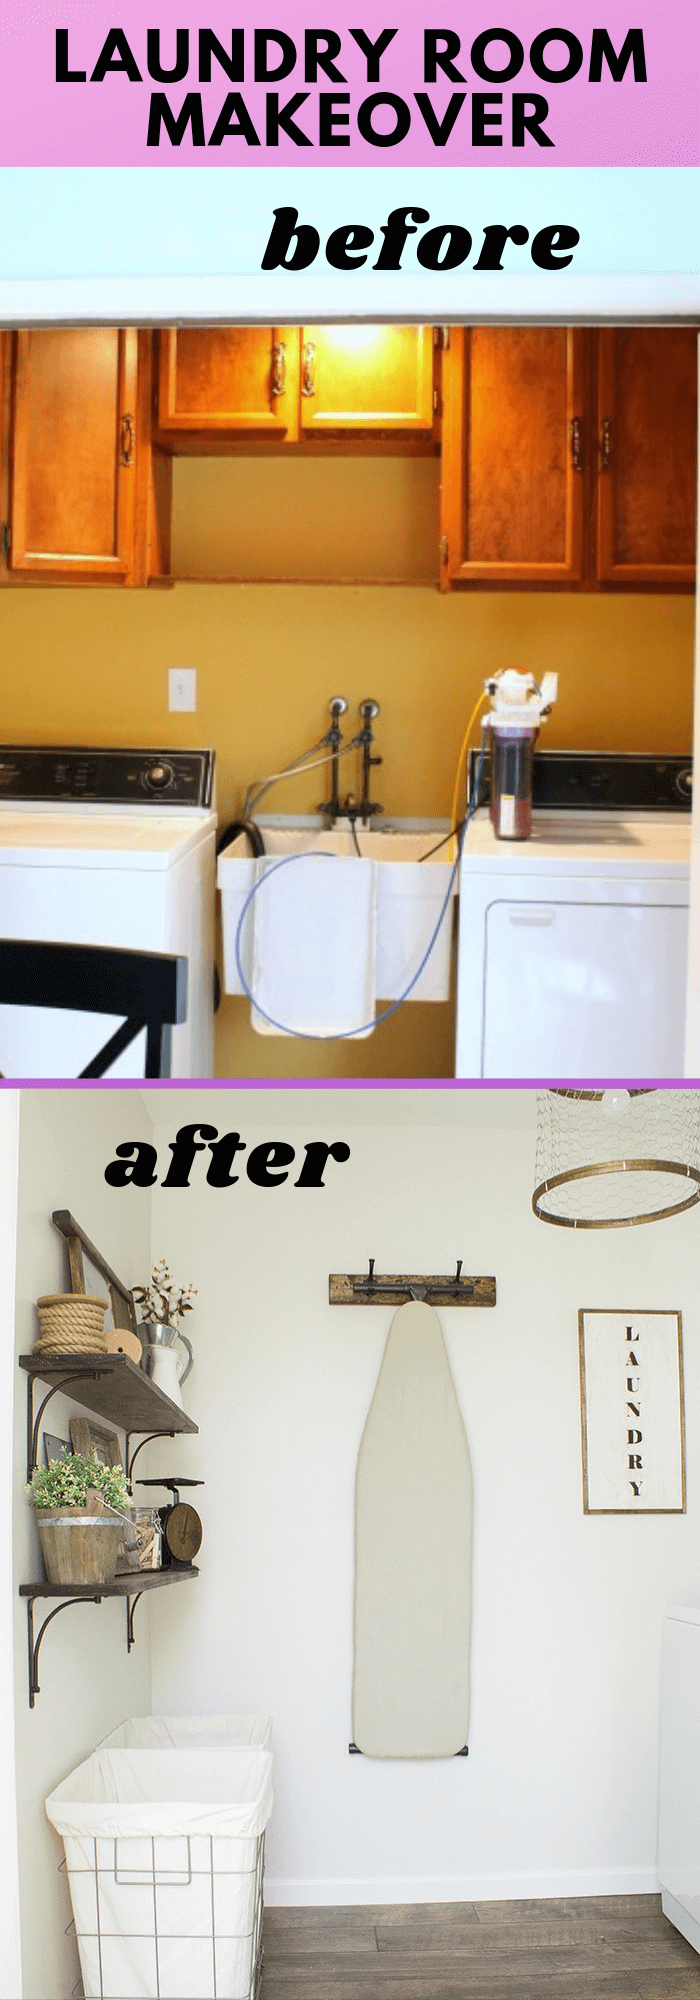 Rustic industrial laundry room: Wood shelf with a lot of fun accessories and hampers for laundry bins